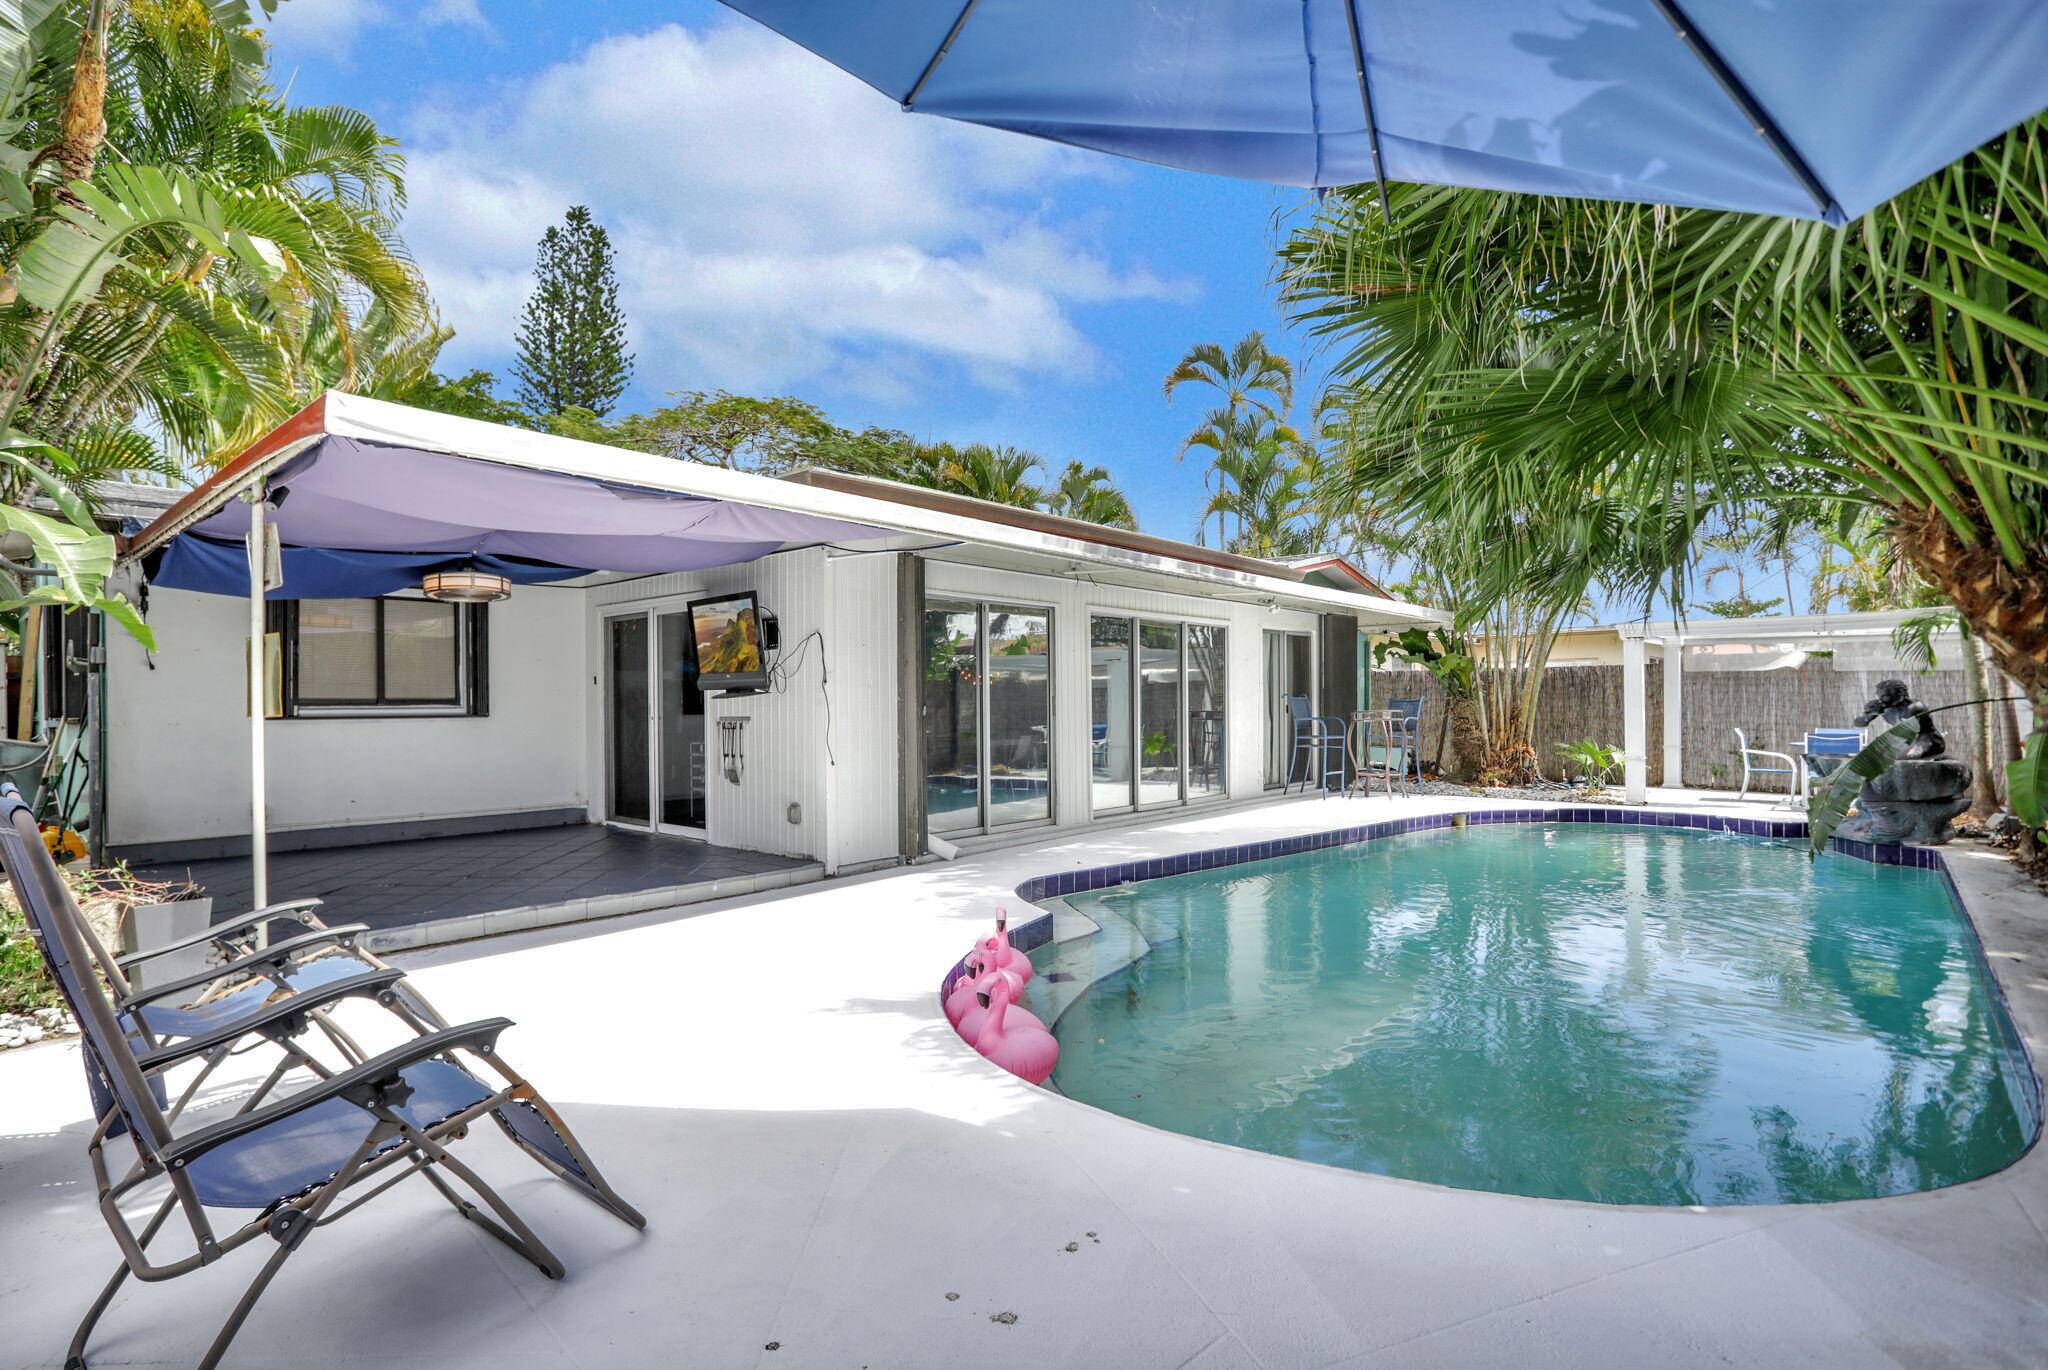 Don't miss out on this Tropical Paradise in Oakland Park.